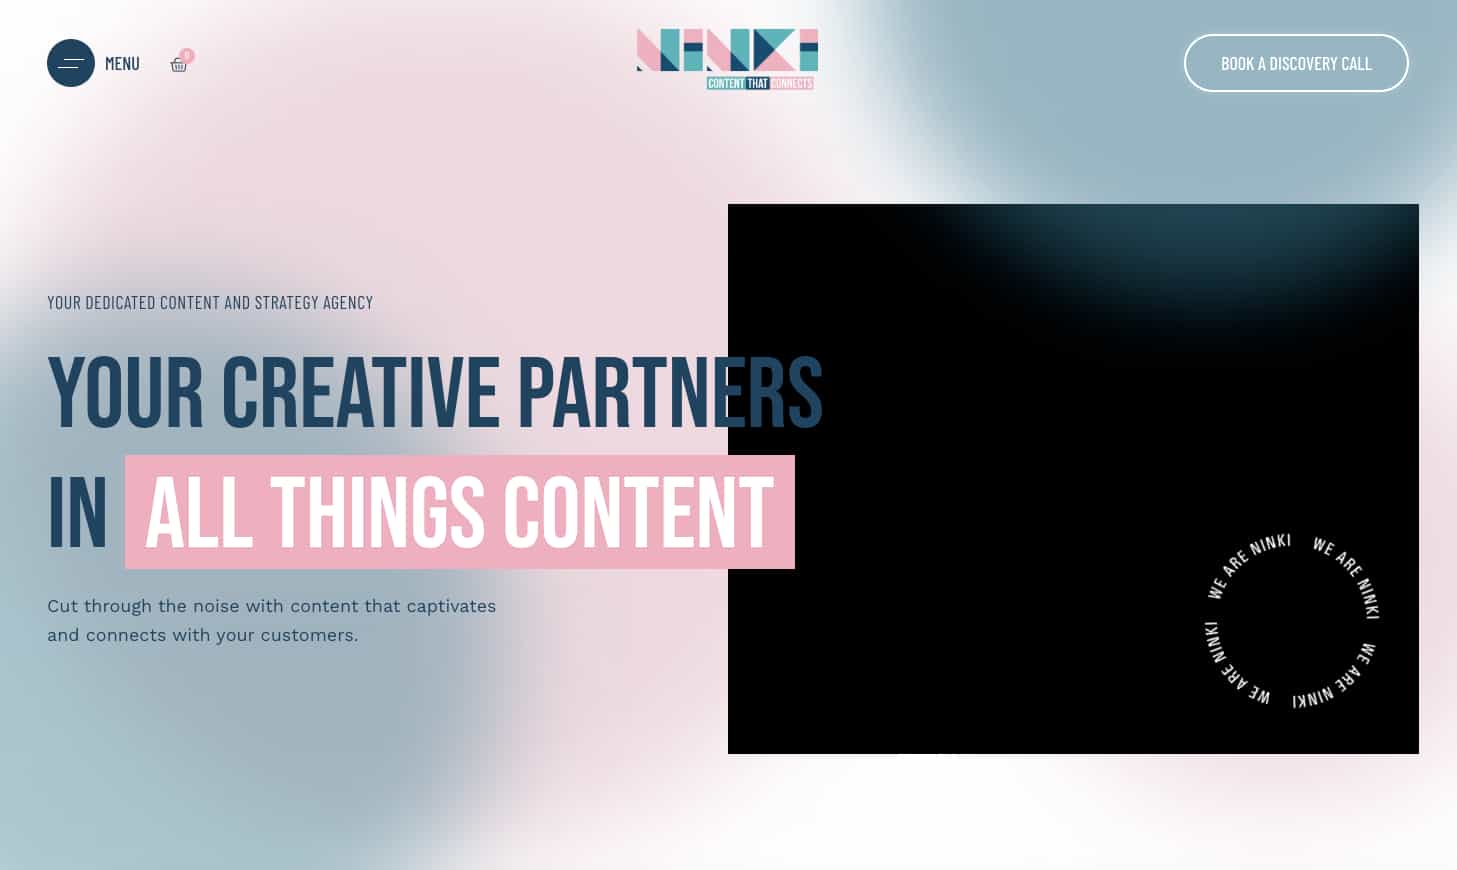 NINKI Content and Strategy Agency